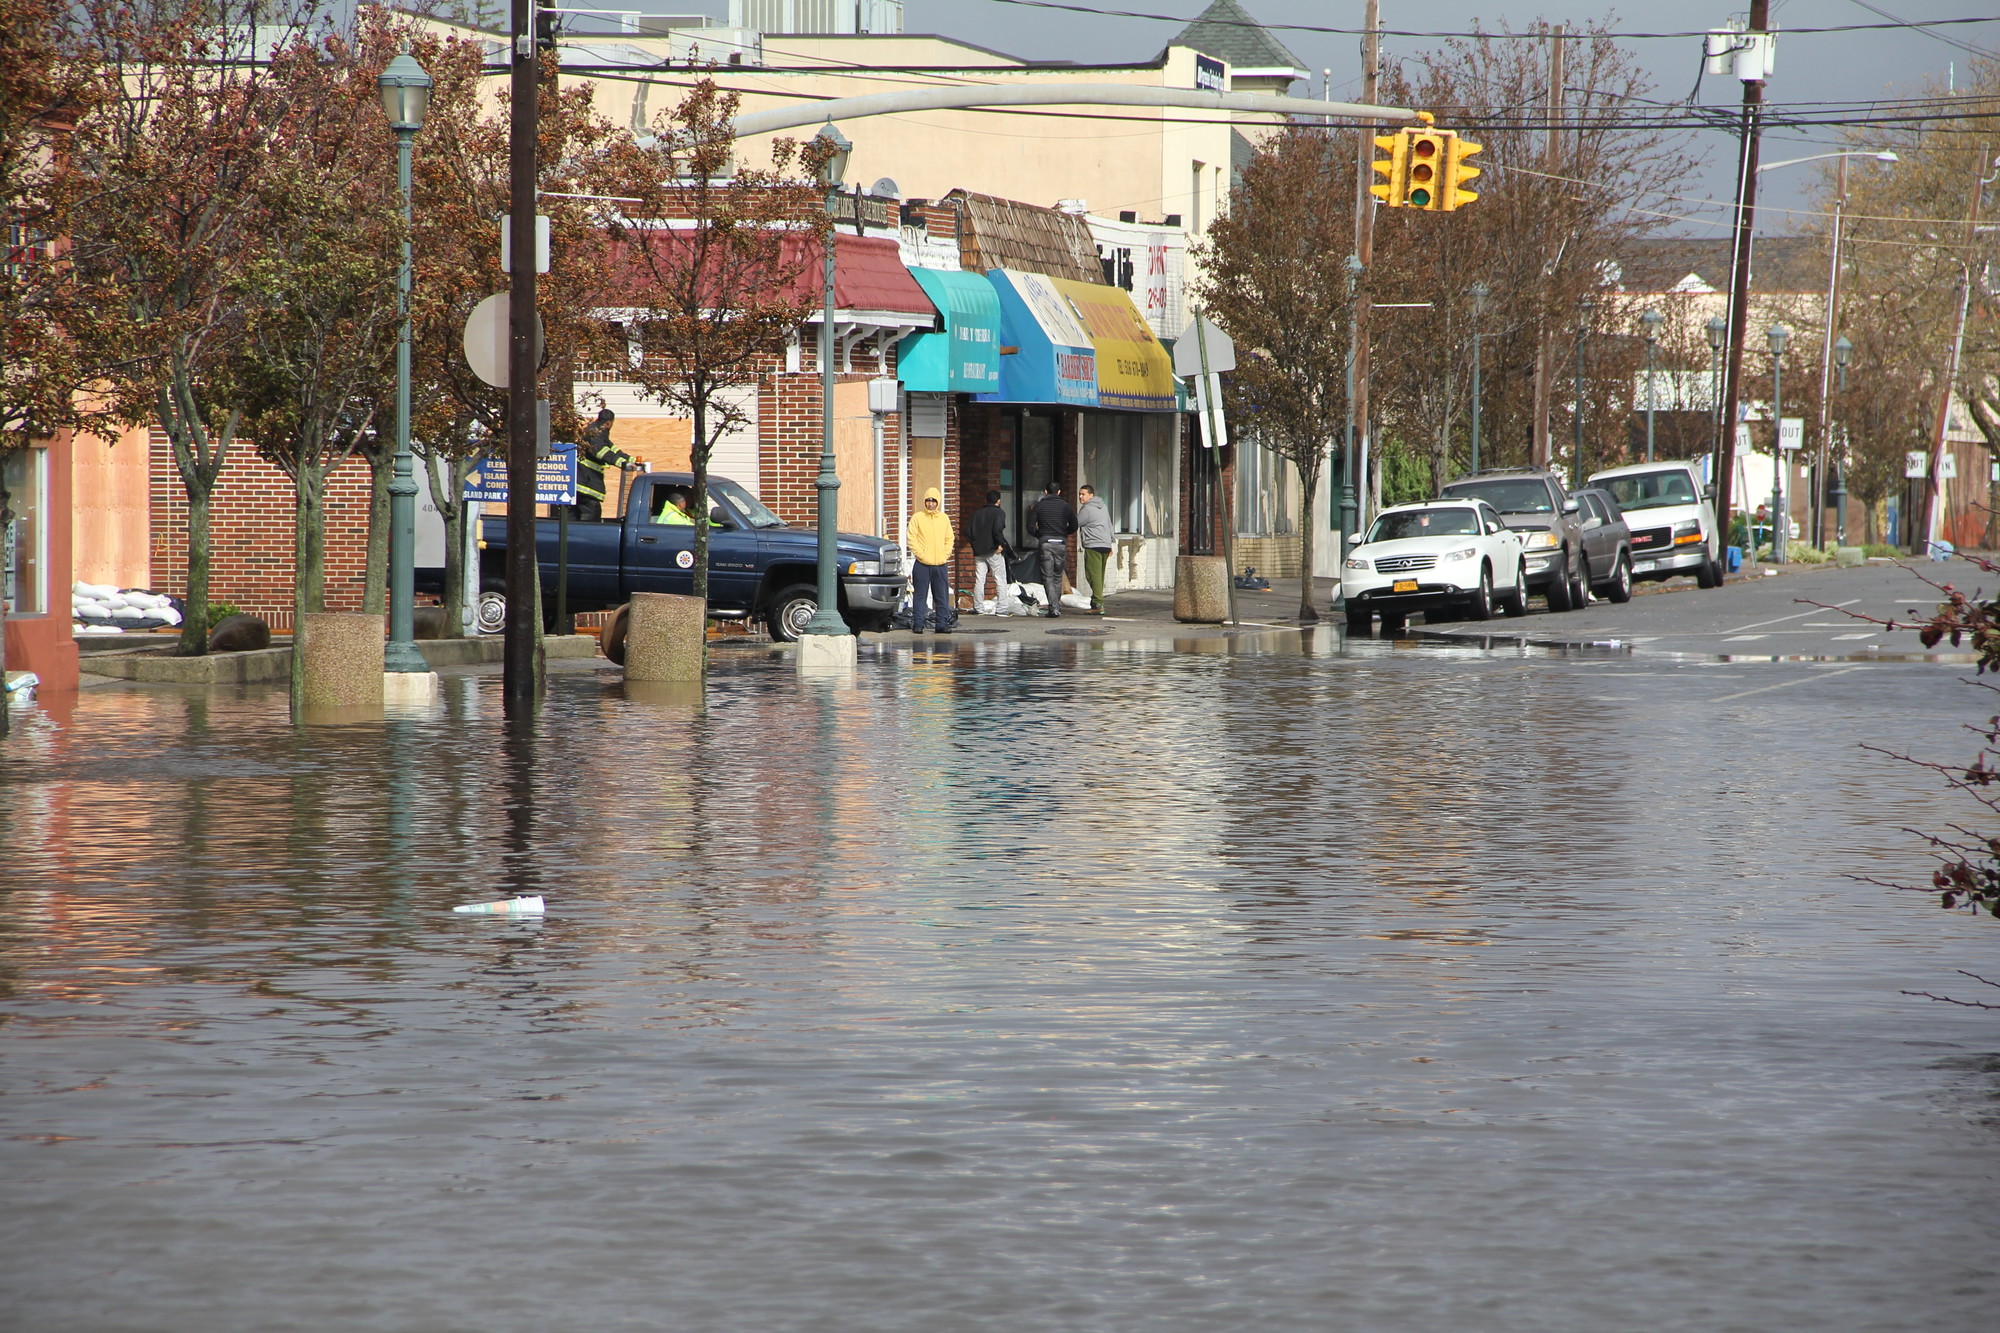 Island Park was among the hardest hit by Superstorm Sandy on Oct. 29, 2012.